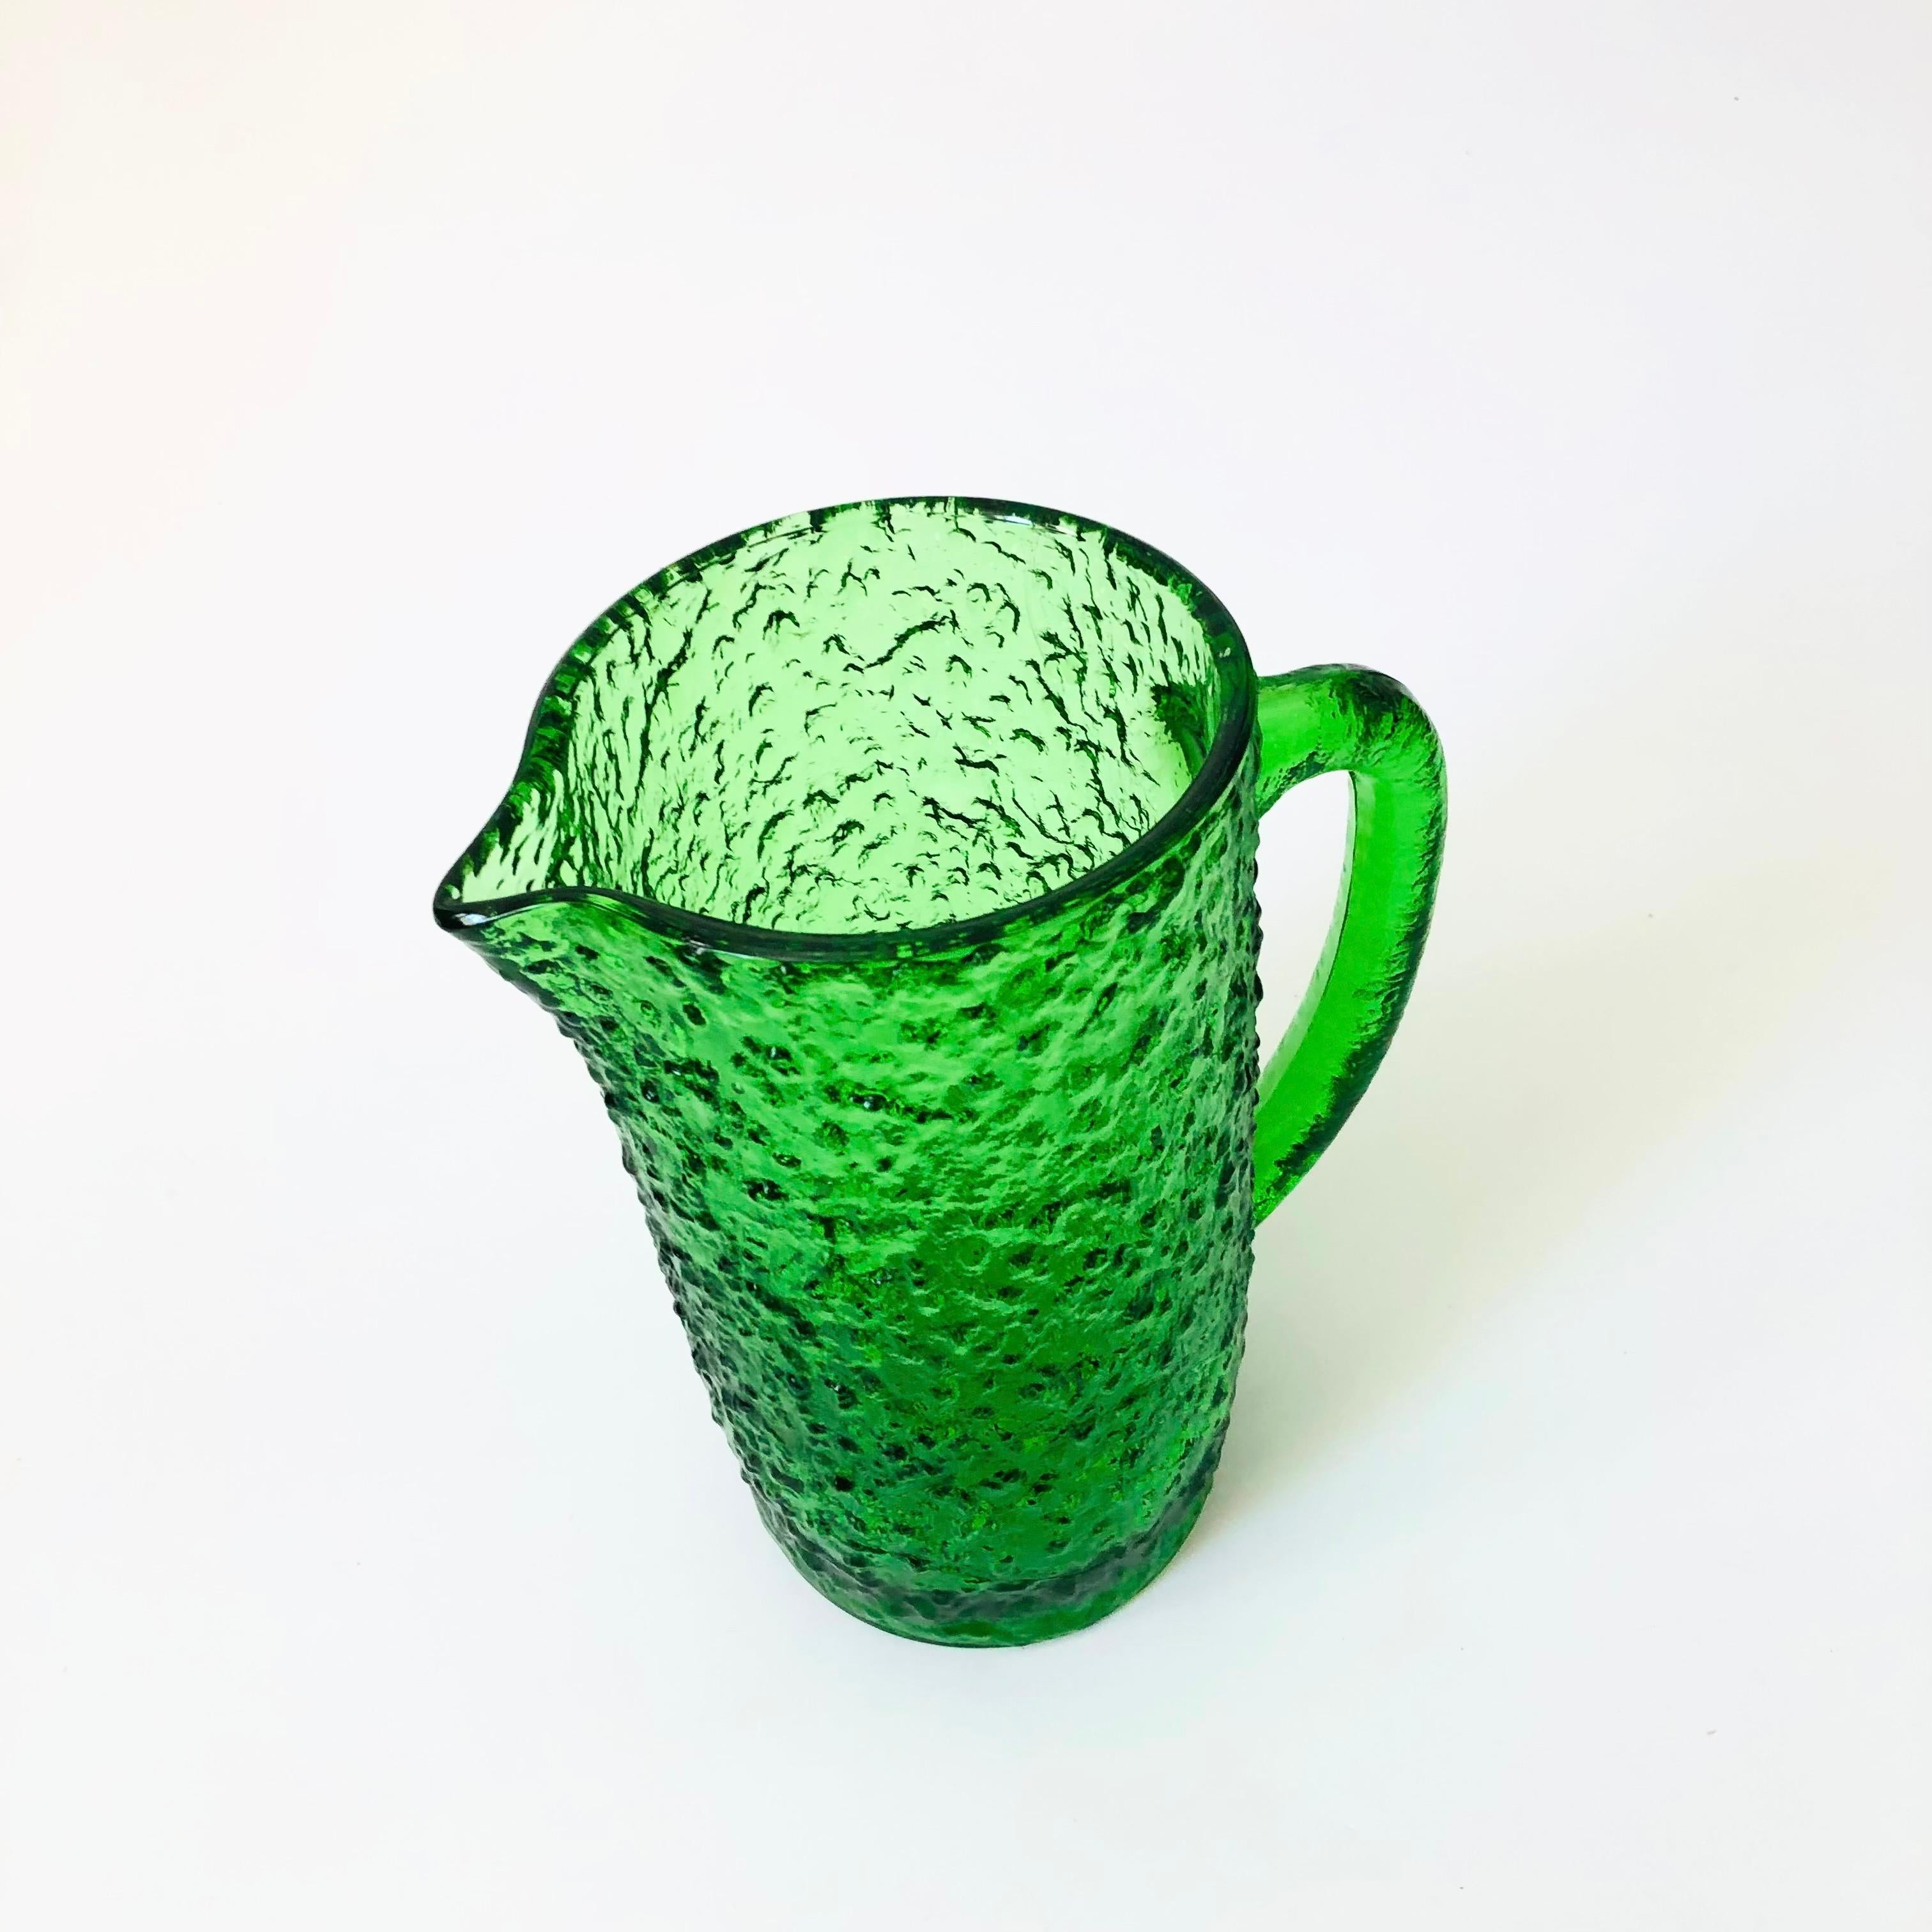 A vintage mid century pitcher made of textured glass in a vibrant green color.

